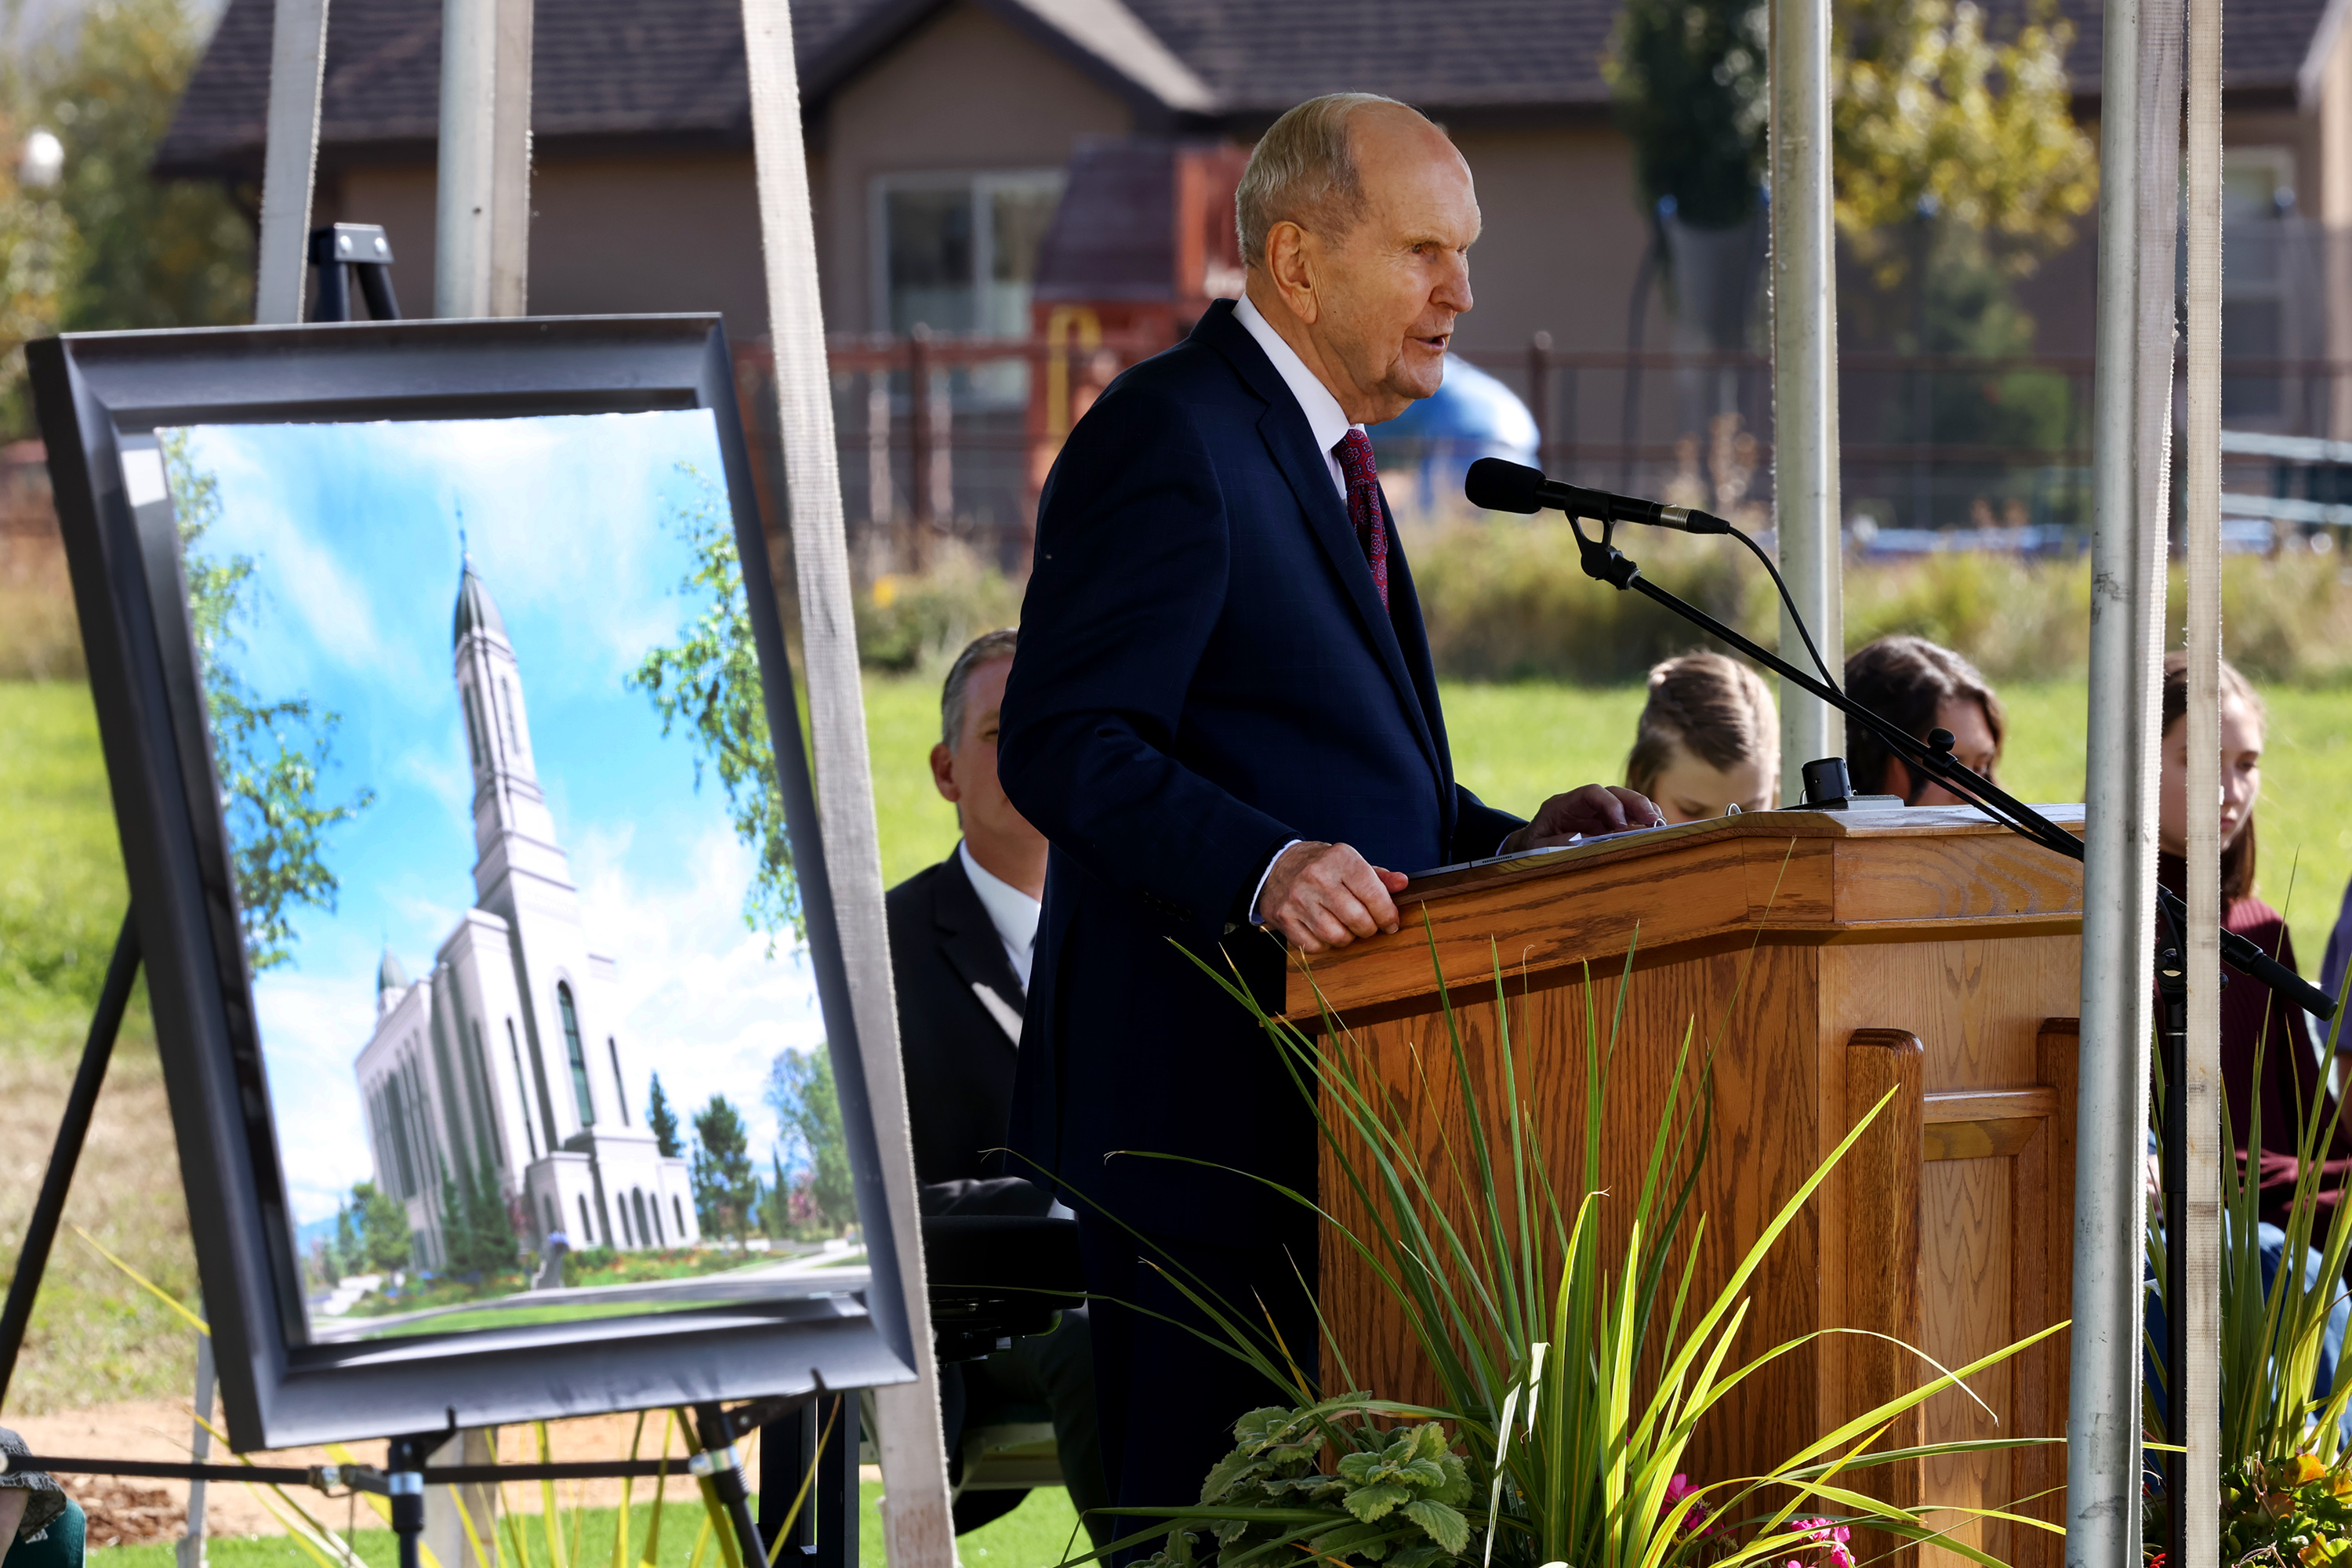 President Russell M. Nelson speaking at a pulpit outside.